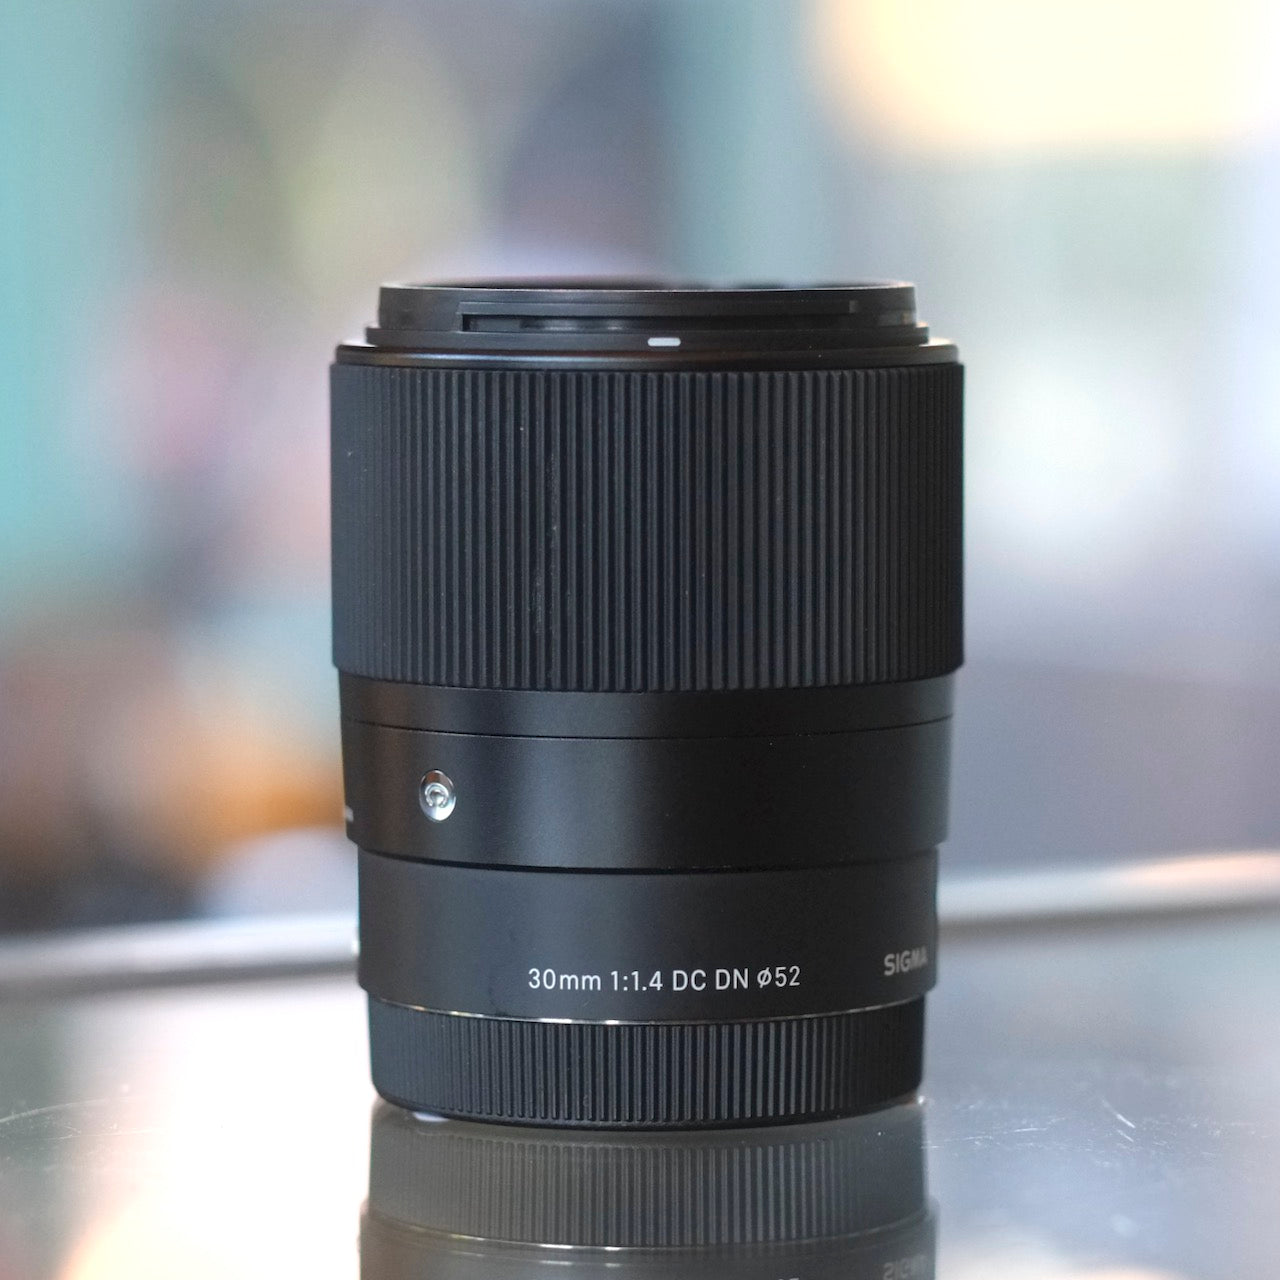 Sigma 30mm f1.4 DC DN for Sony E